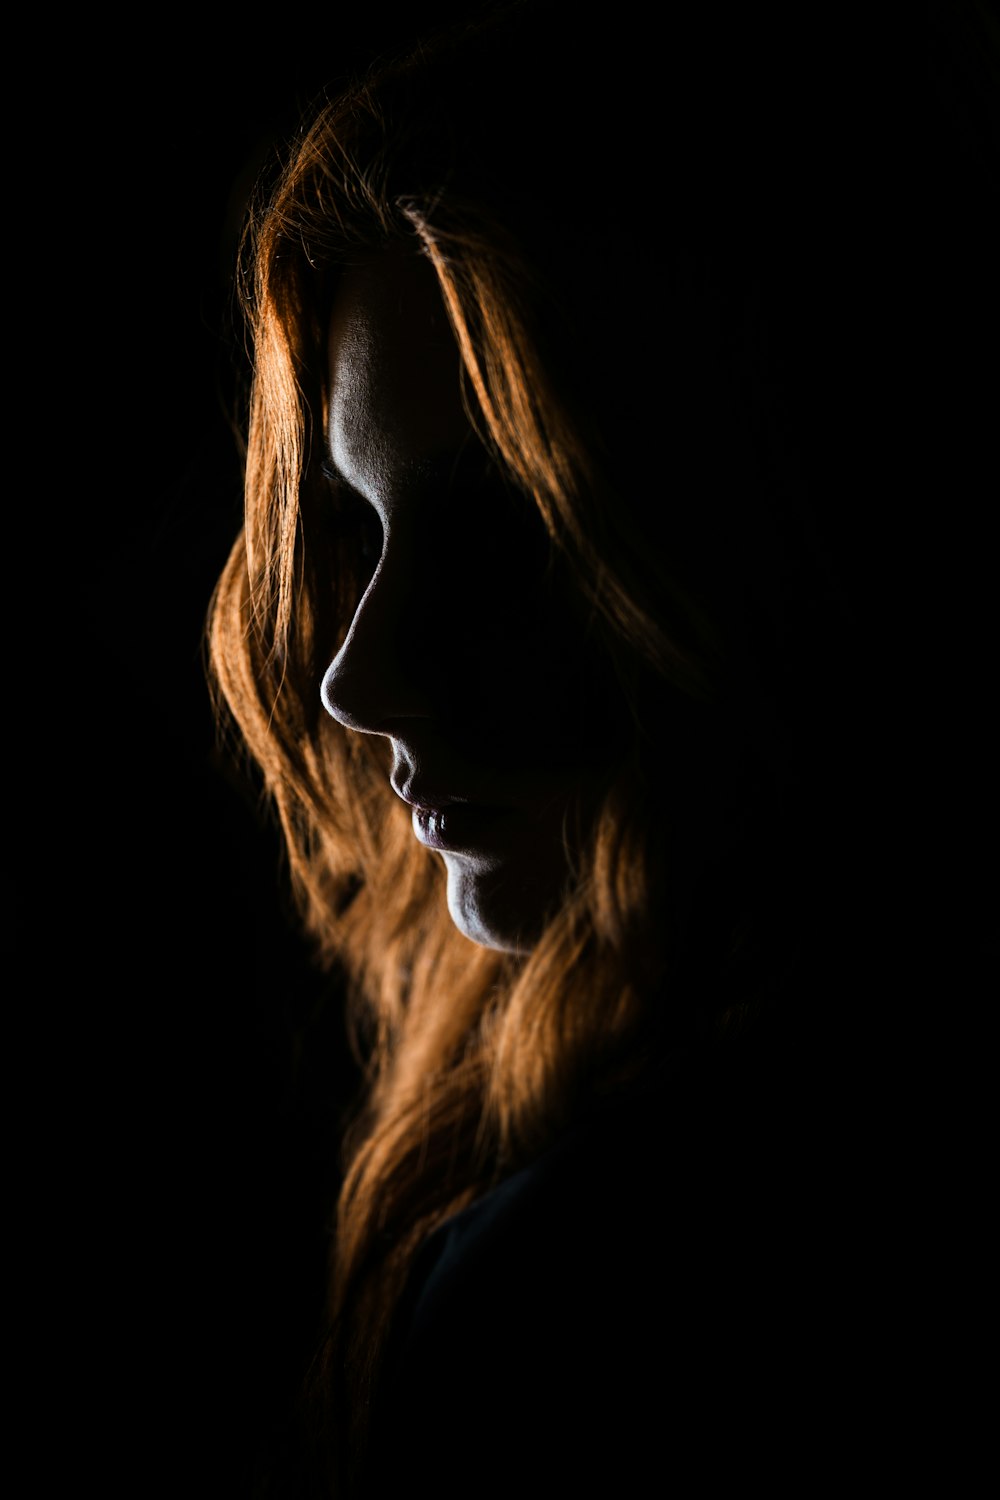 woman's face on black background